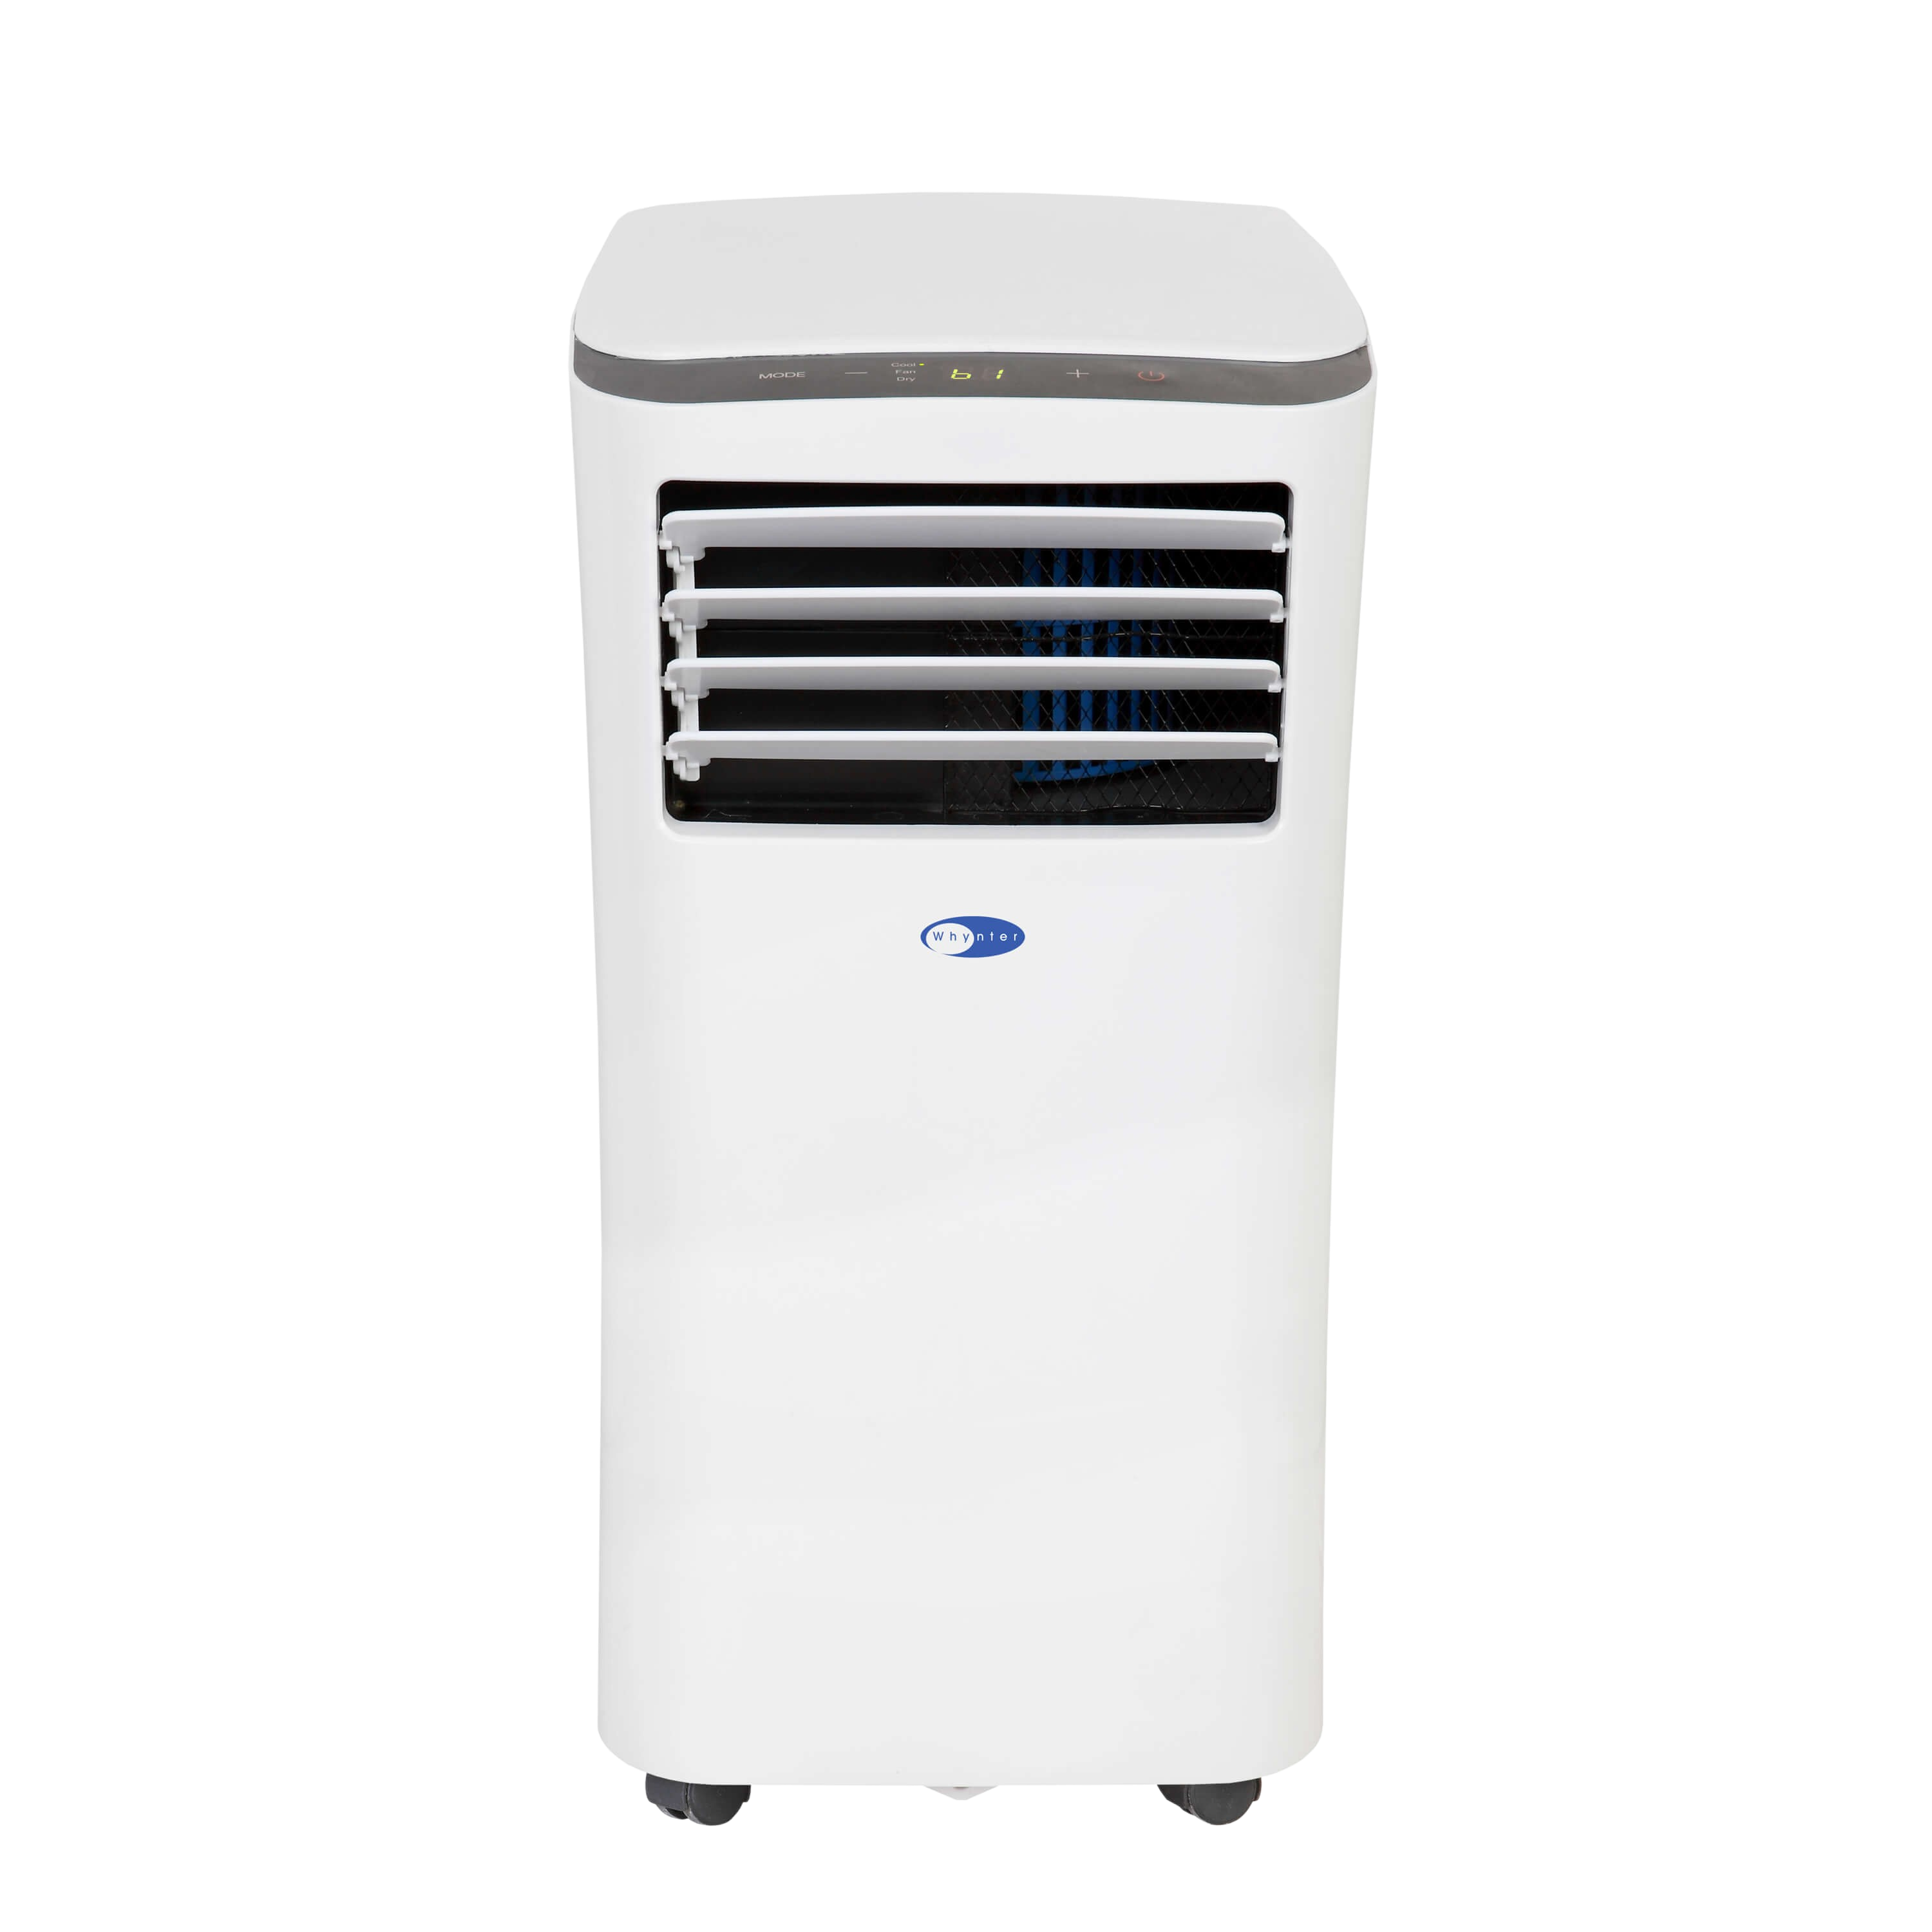 Whynter, Whynter ARC-102CS 10,000 BTU Remote Control Compact Portable Air Conditioner in White New